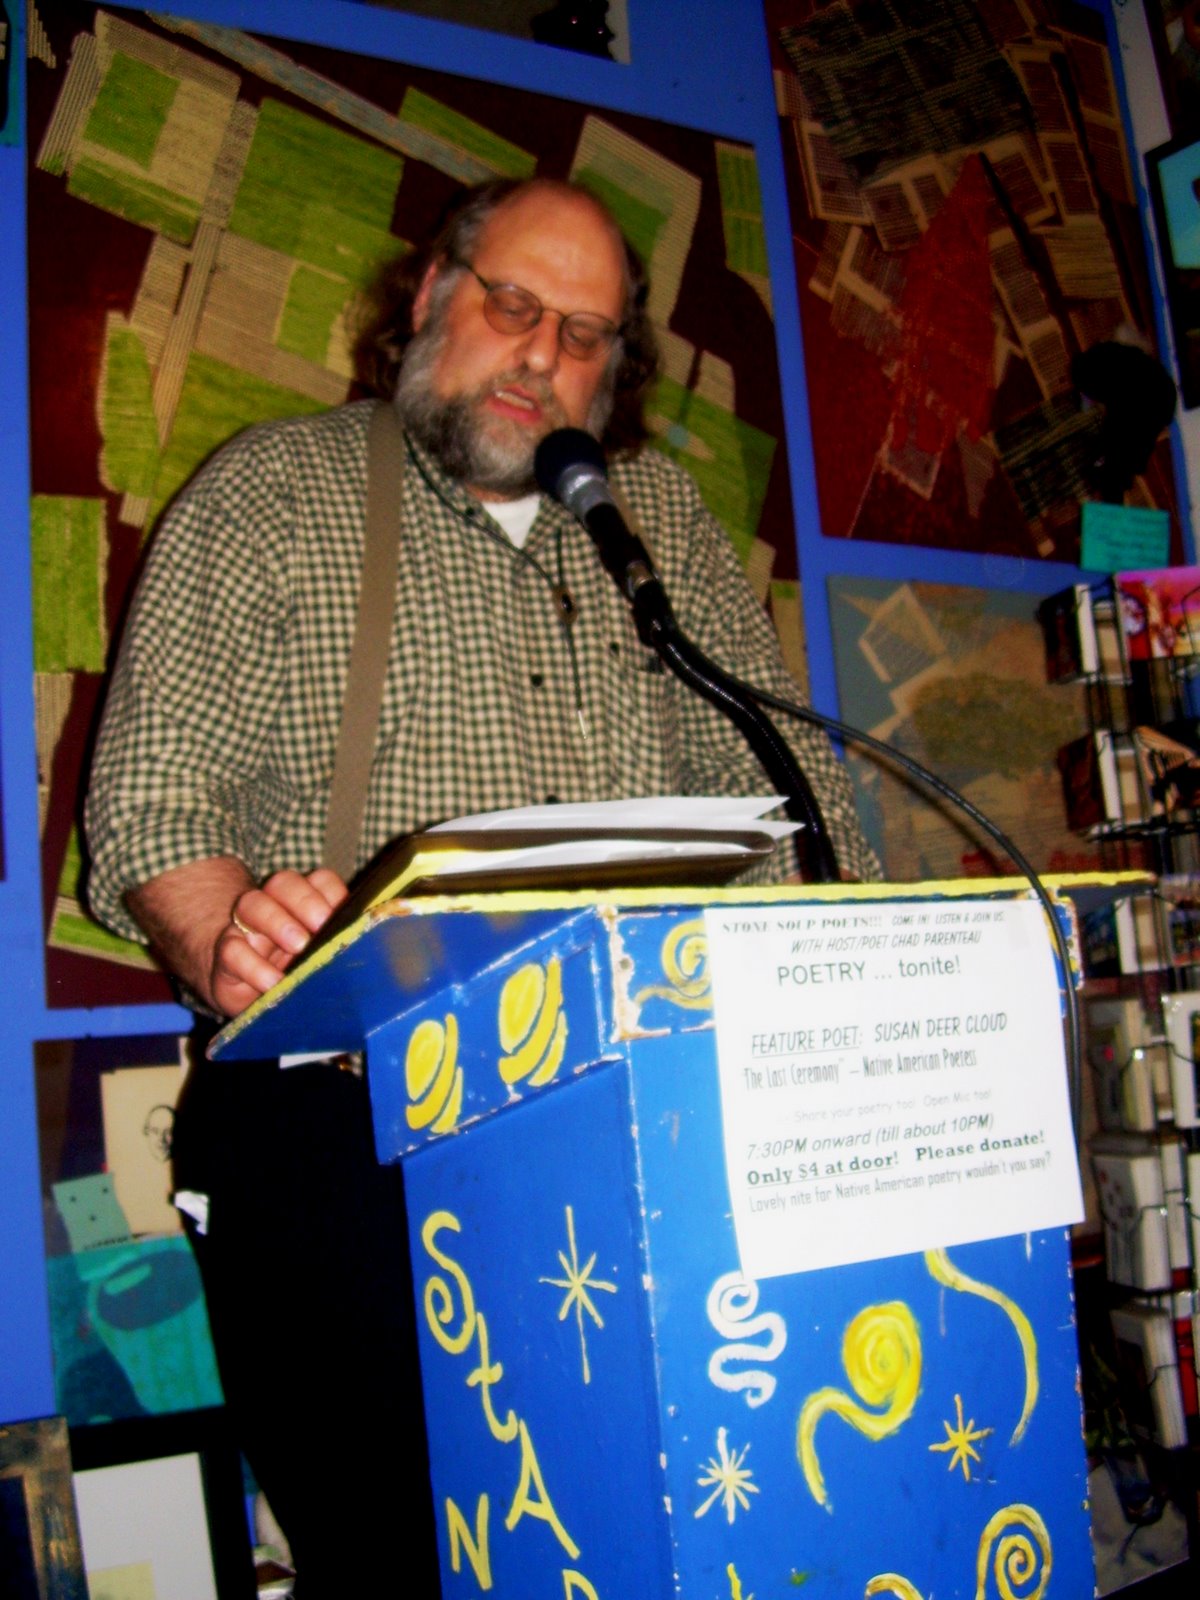 [Edward+reading+at+Stone+Soup+poetry.jpg]